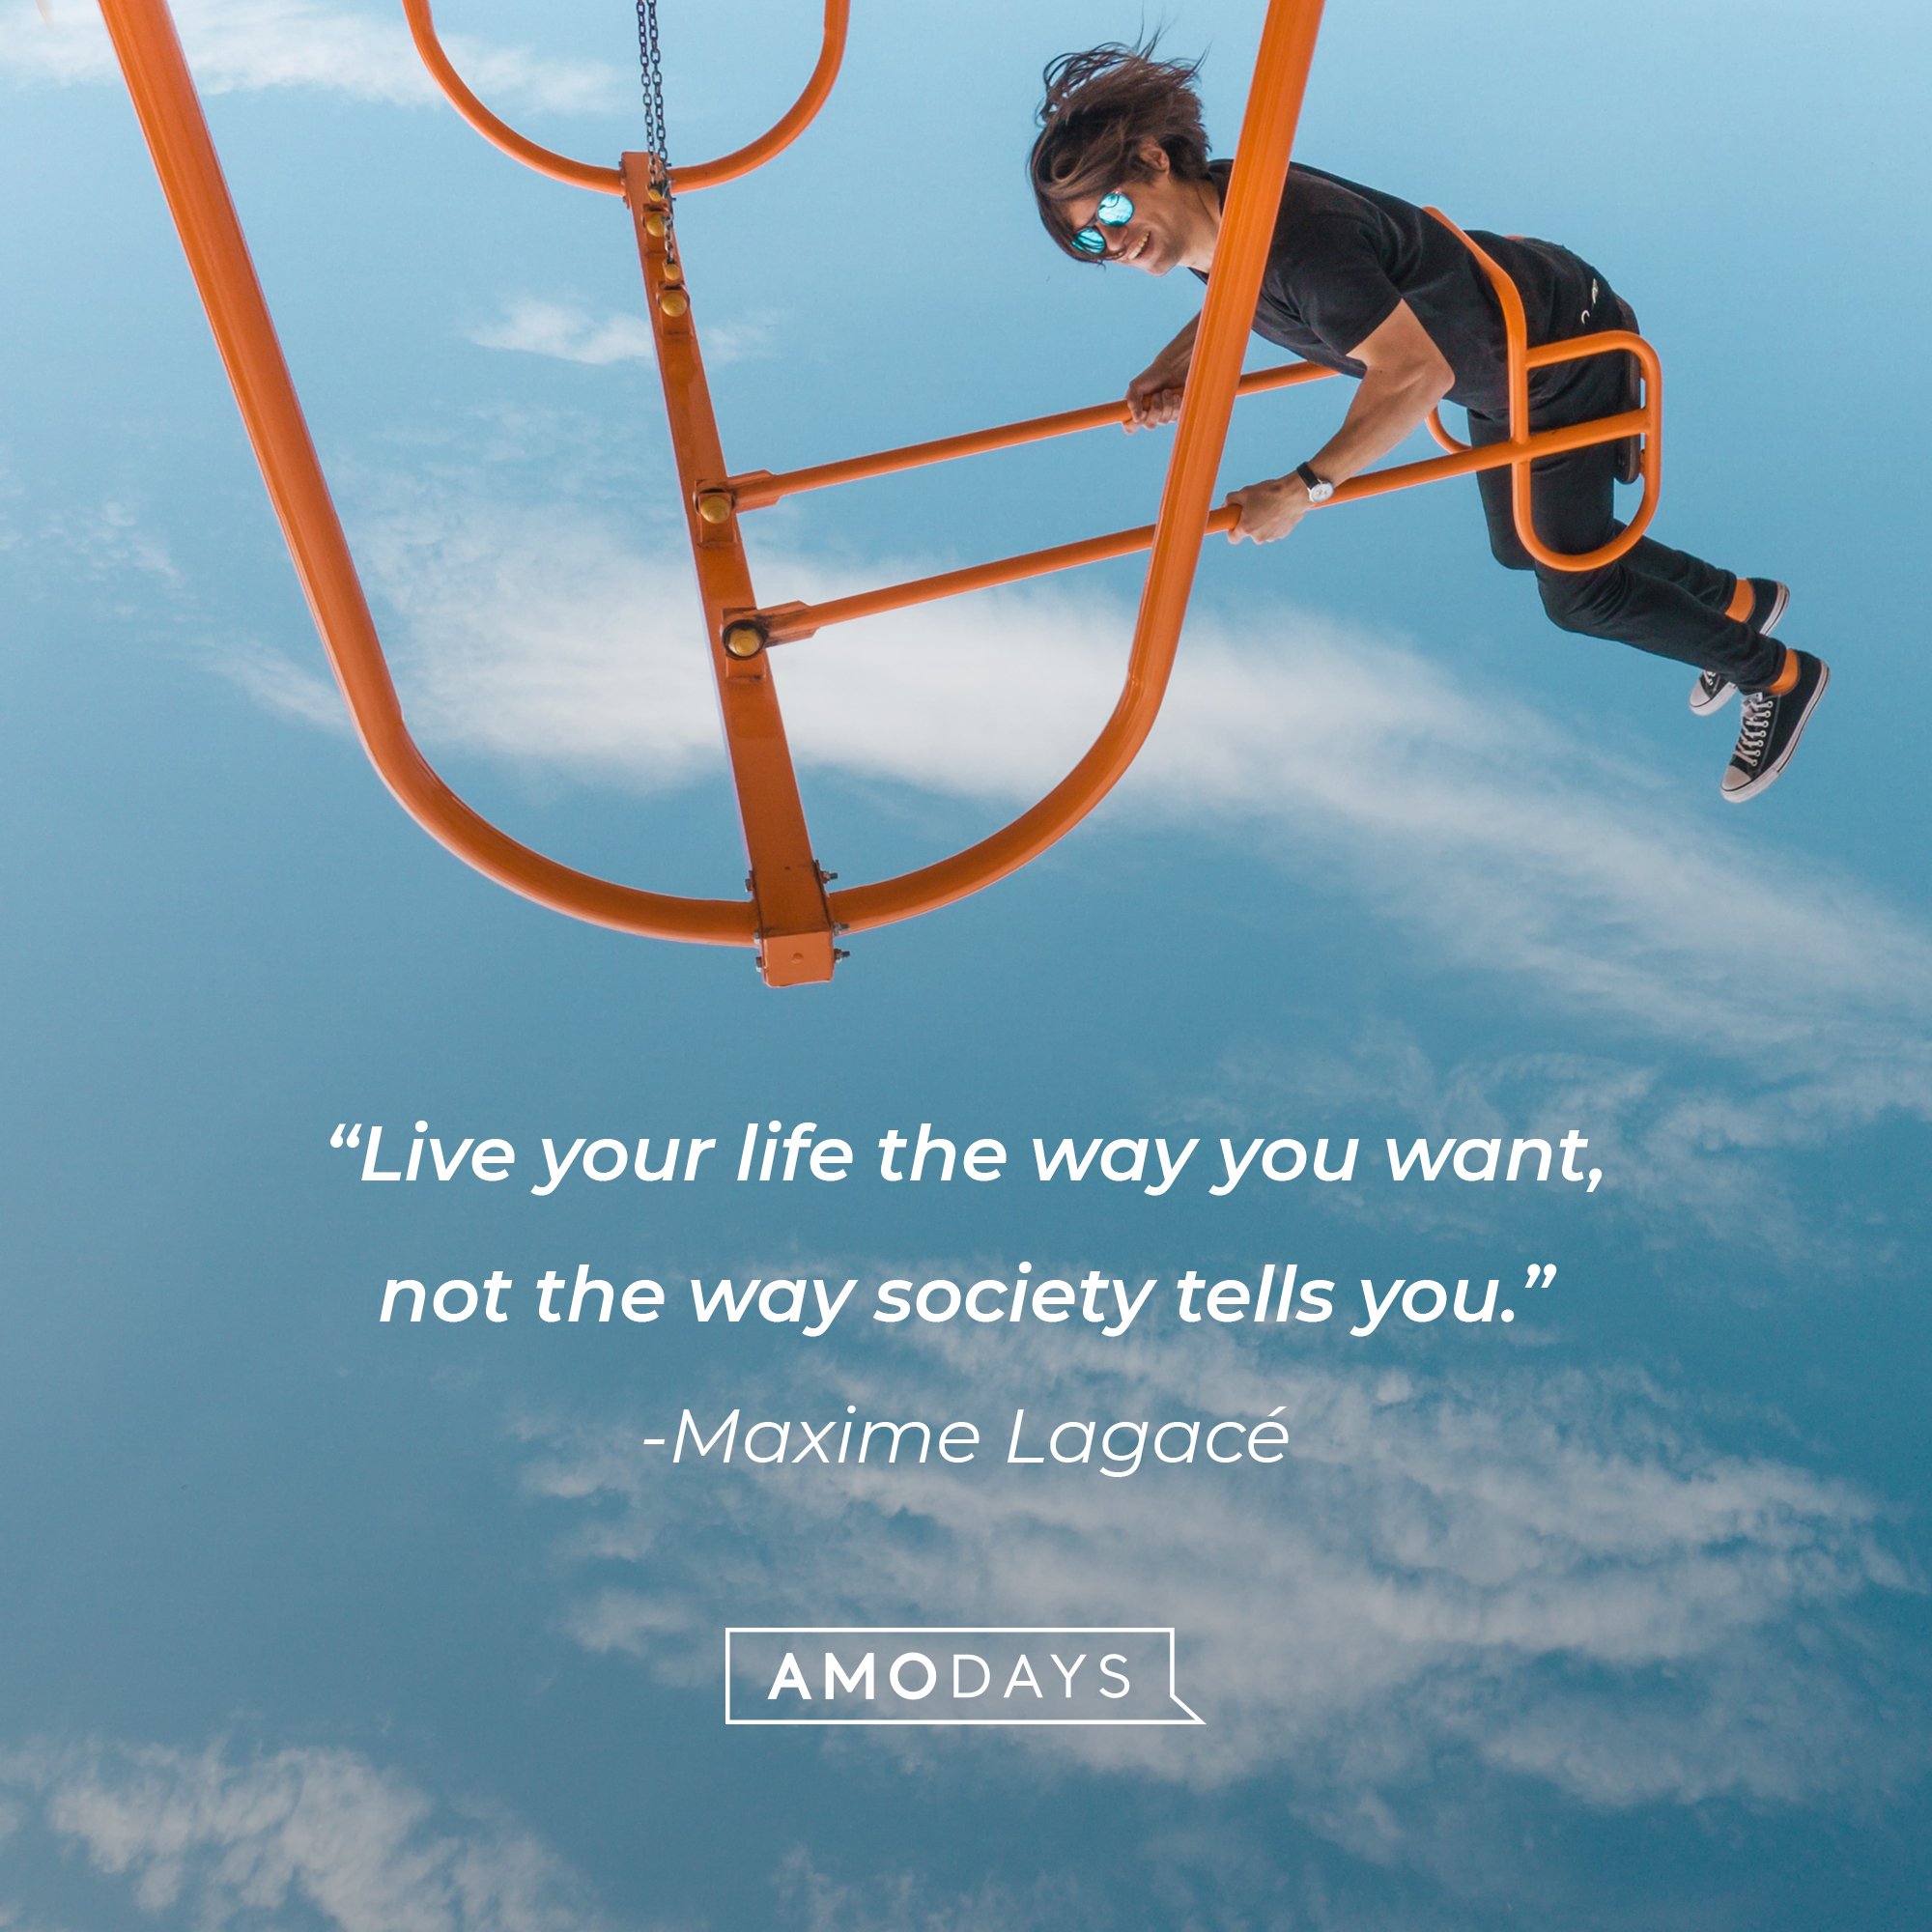  Maxime Lagacé's quote: “Live your life the way you want, not the way society tells you.” | Image: AmoDays